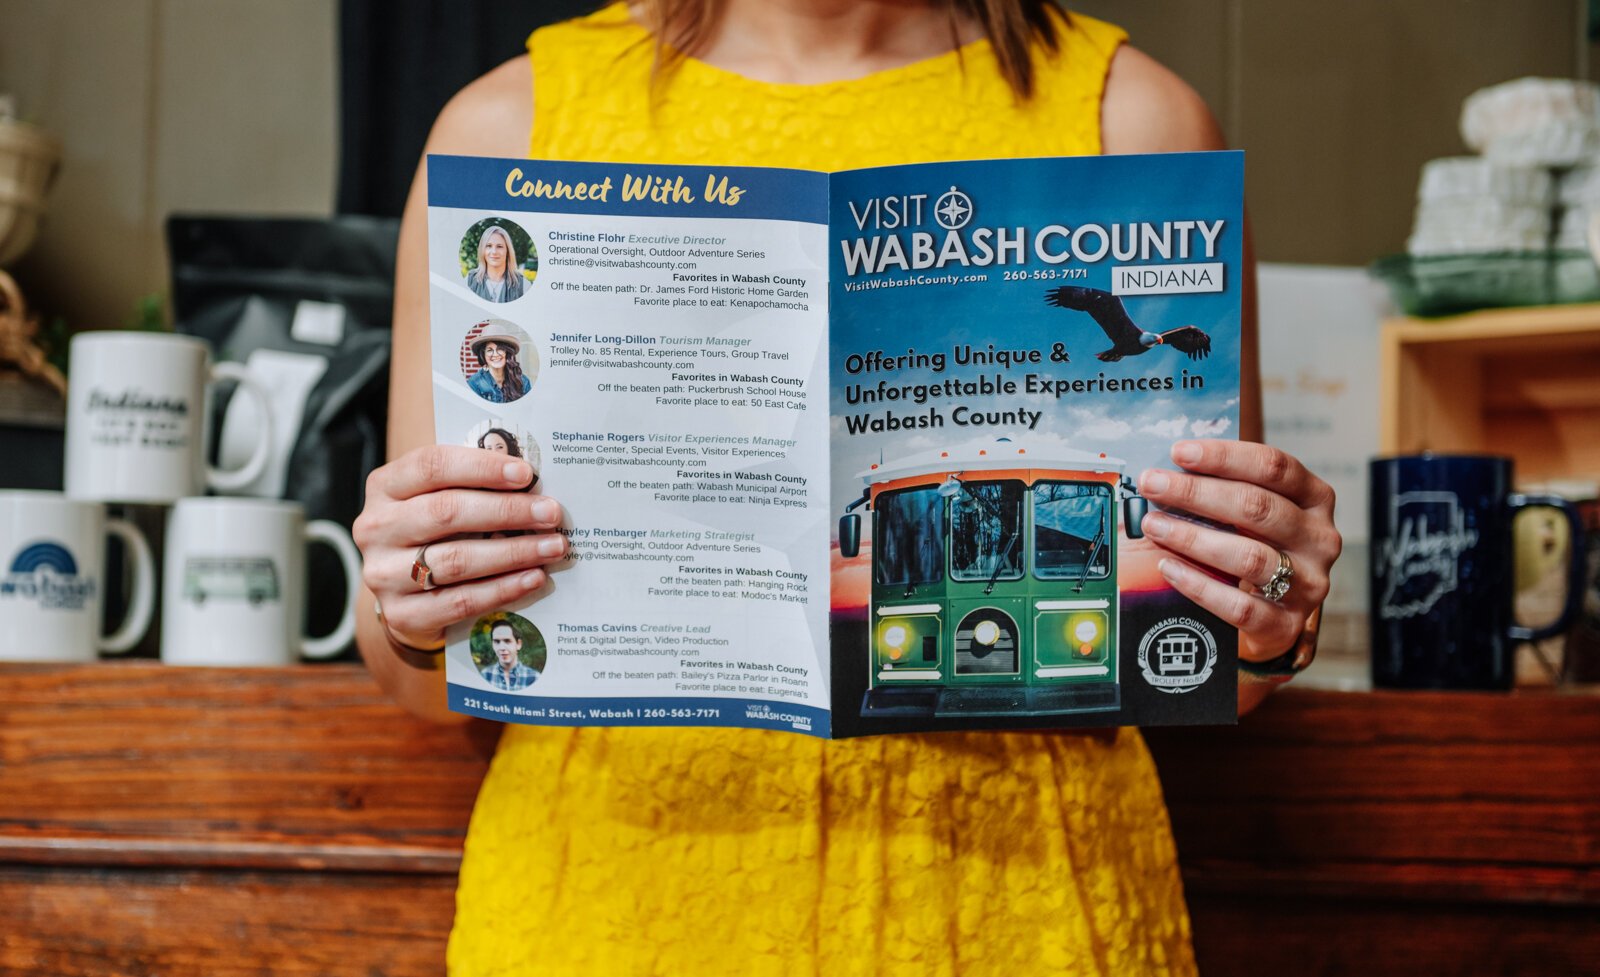 Christine Flohr, Executive Director at Visit Wabash County, holds up a visitor's guide at The Welcome Center.